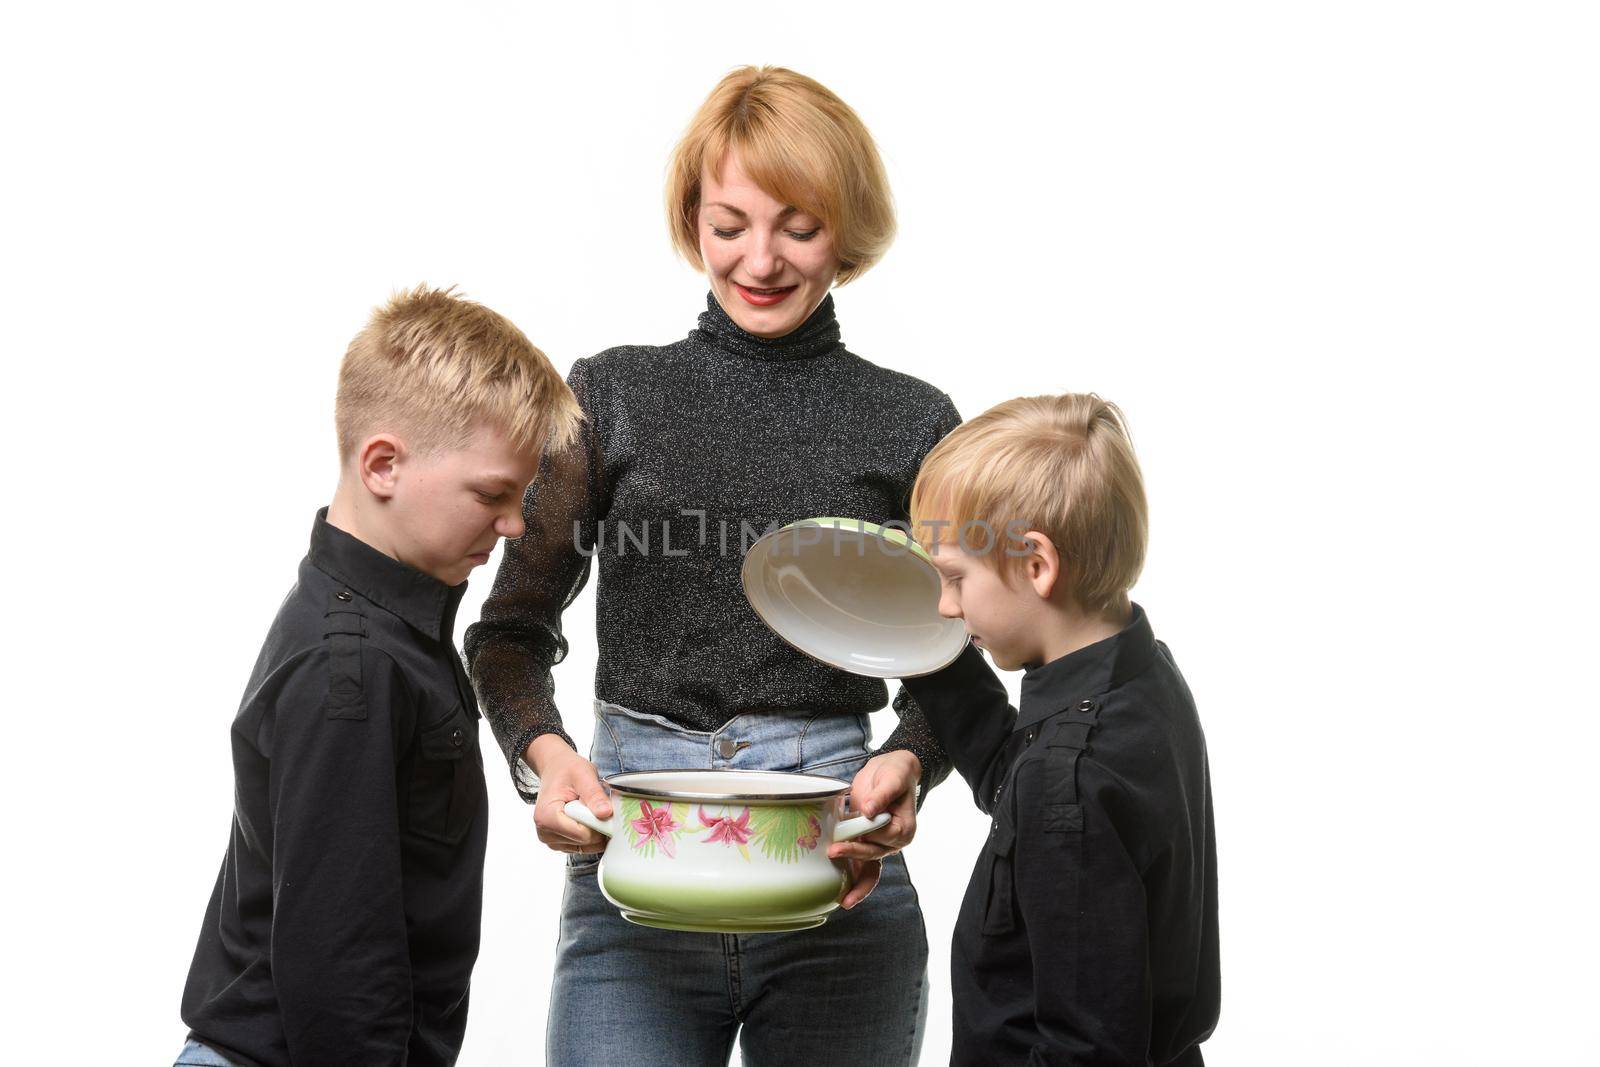 Mom made soup, the kids opened the pot and didn't like the food